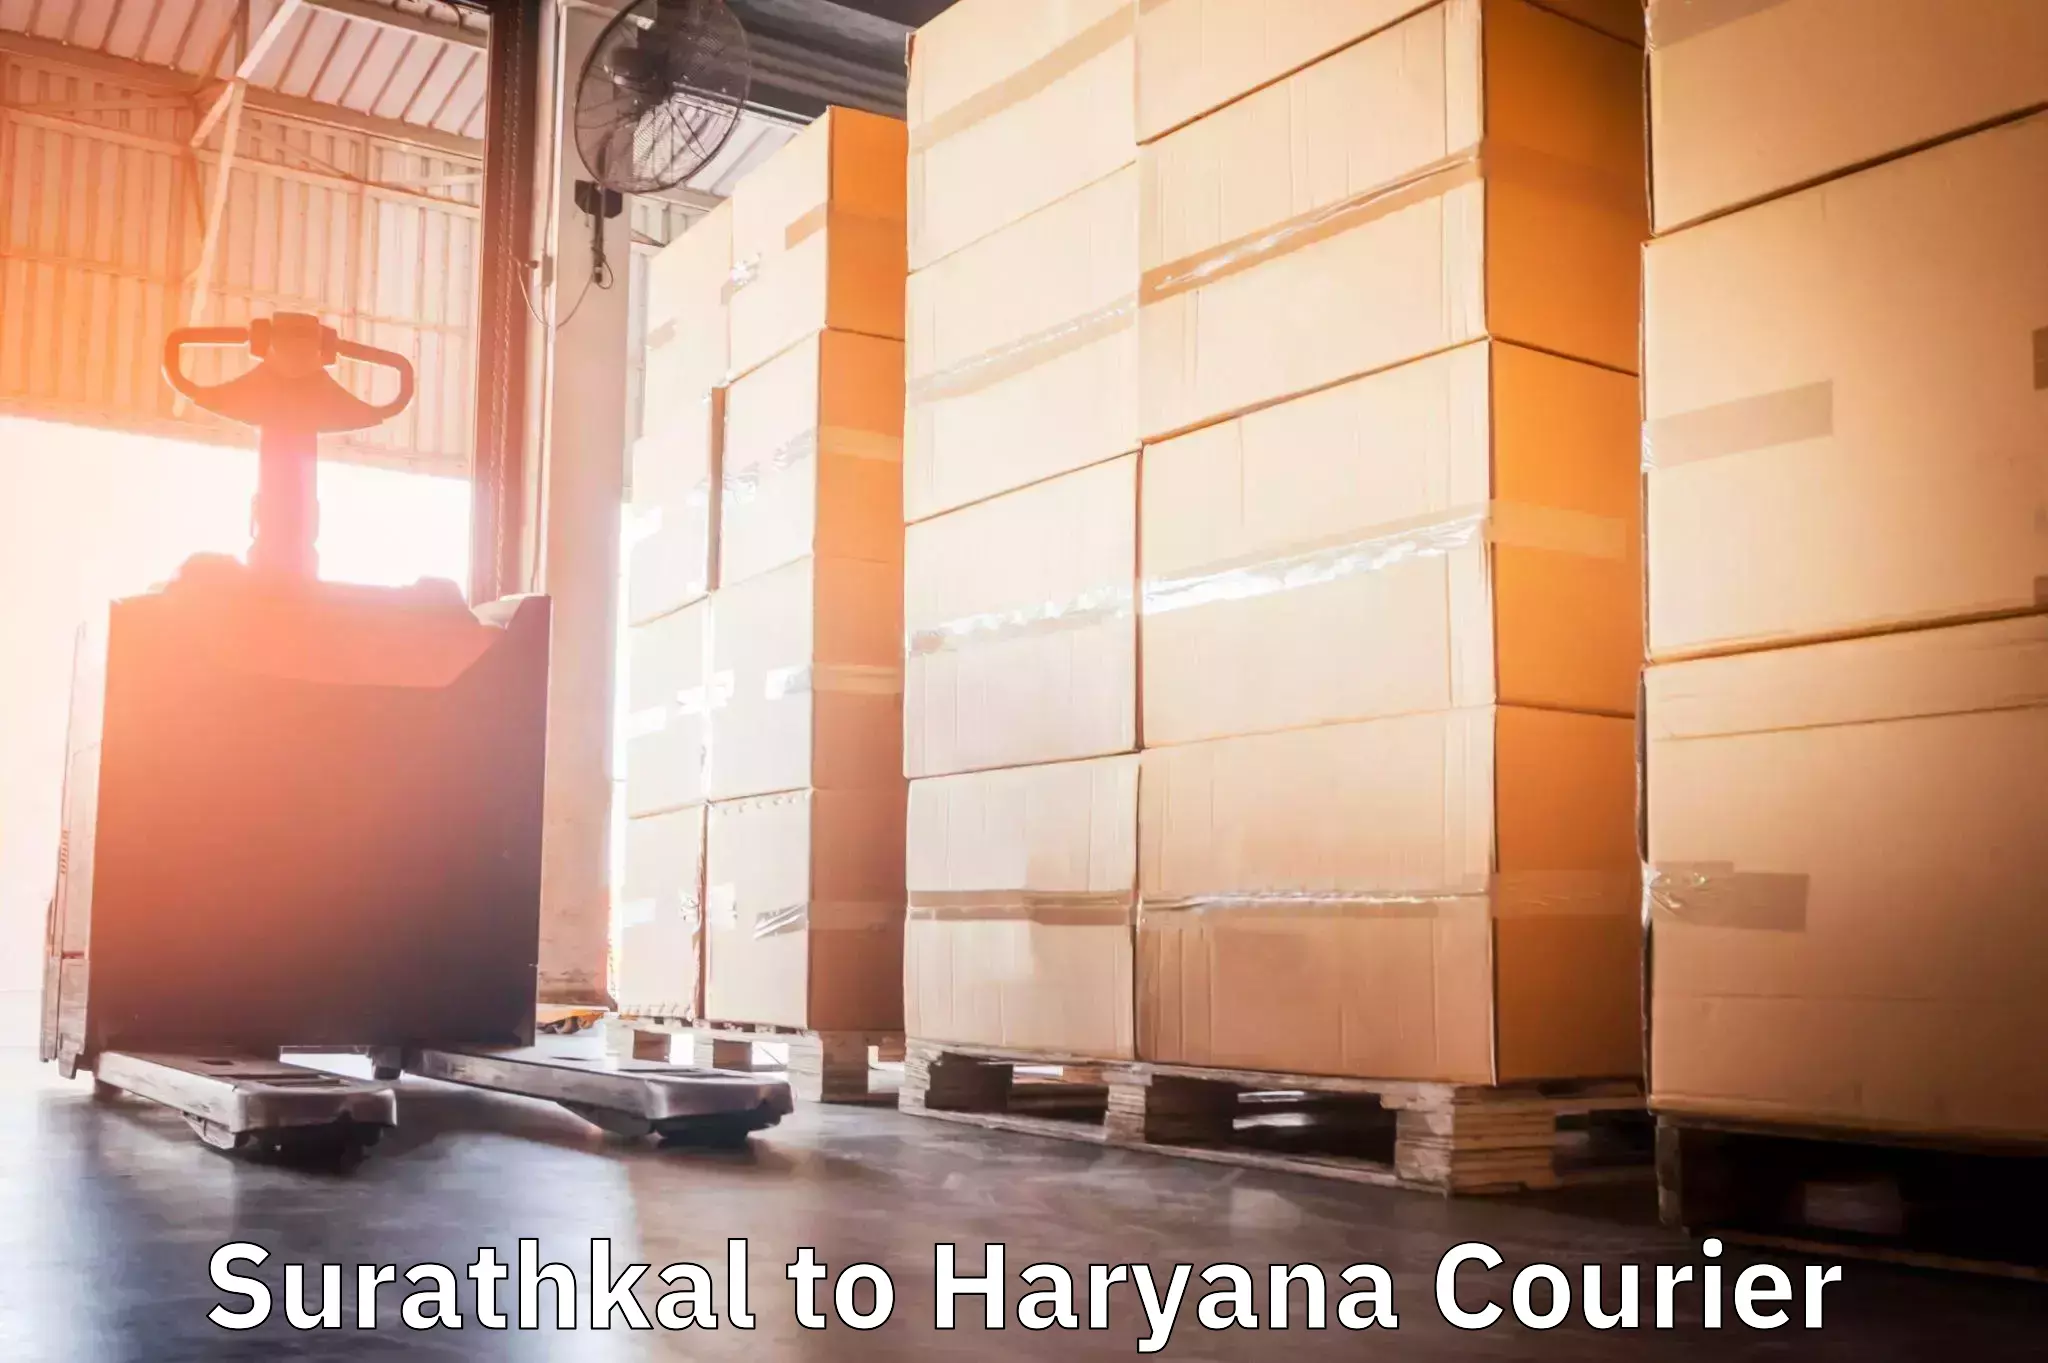 Large-scale shipping solutions Surathkal to NCR Haryana